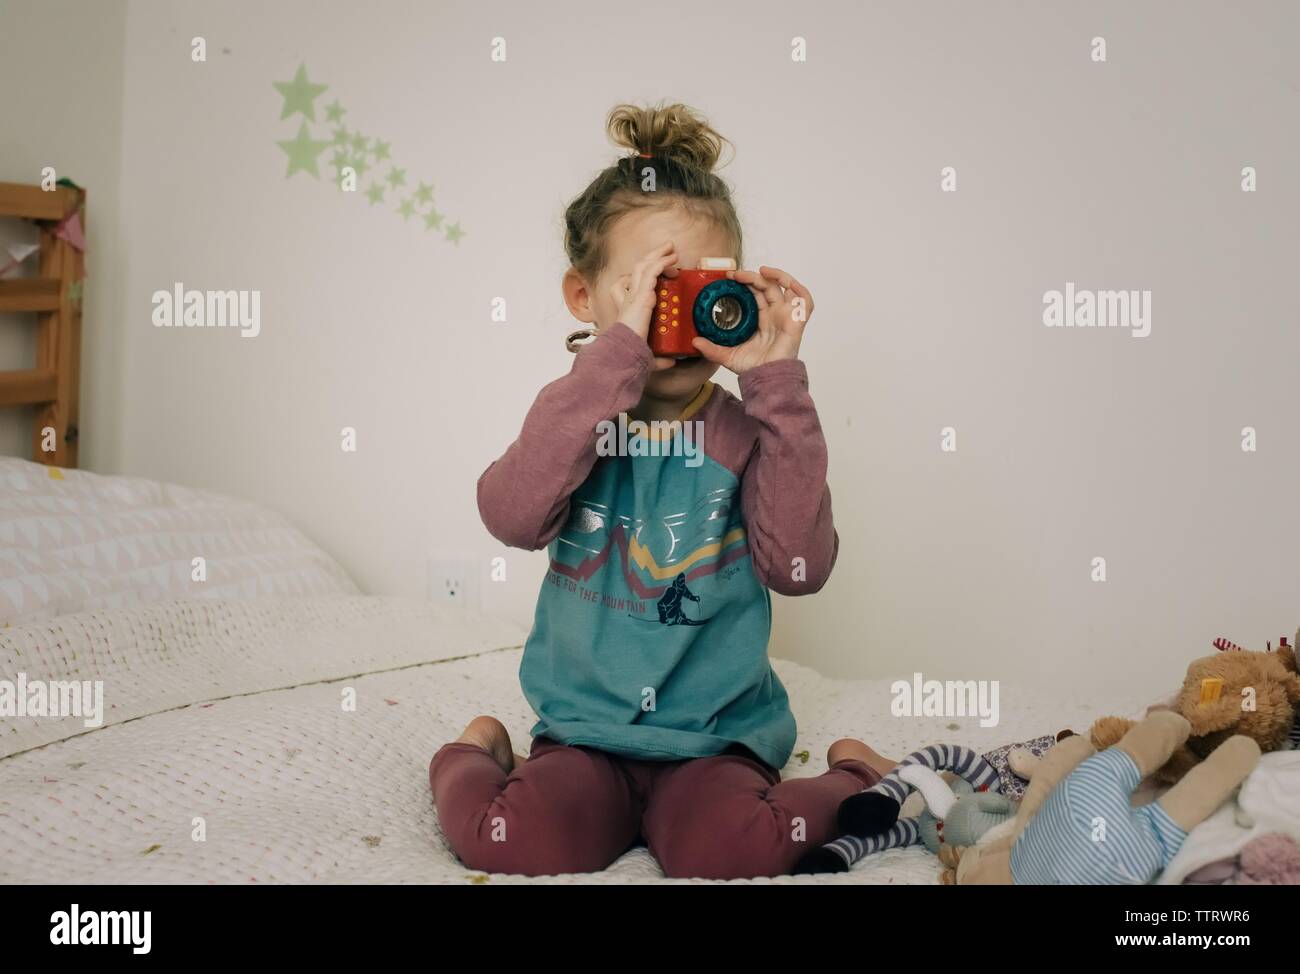 young girl holding camera playing in her bedroom taking pictures Stock Photo